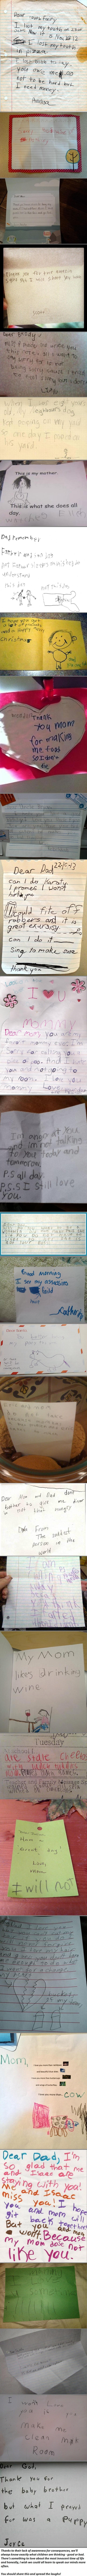 Children Are So Brutally Honest With Their Opinions, Especially These 30 Kids... -   Misc